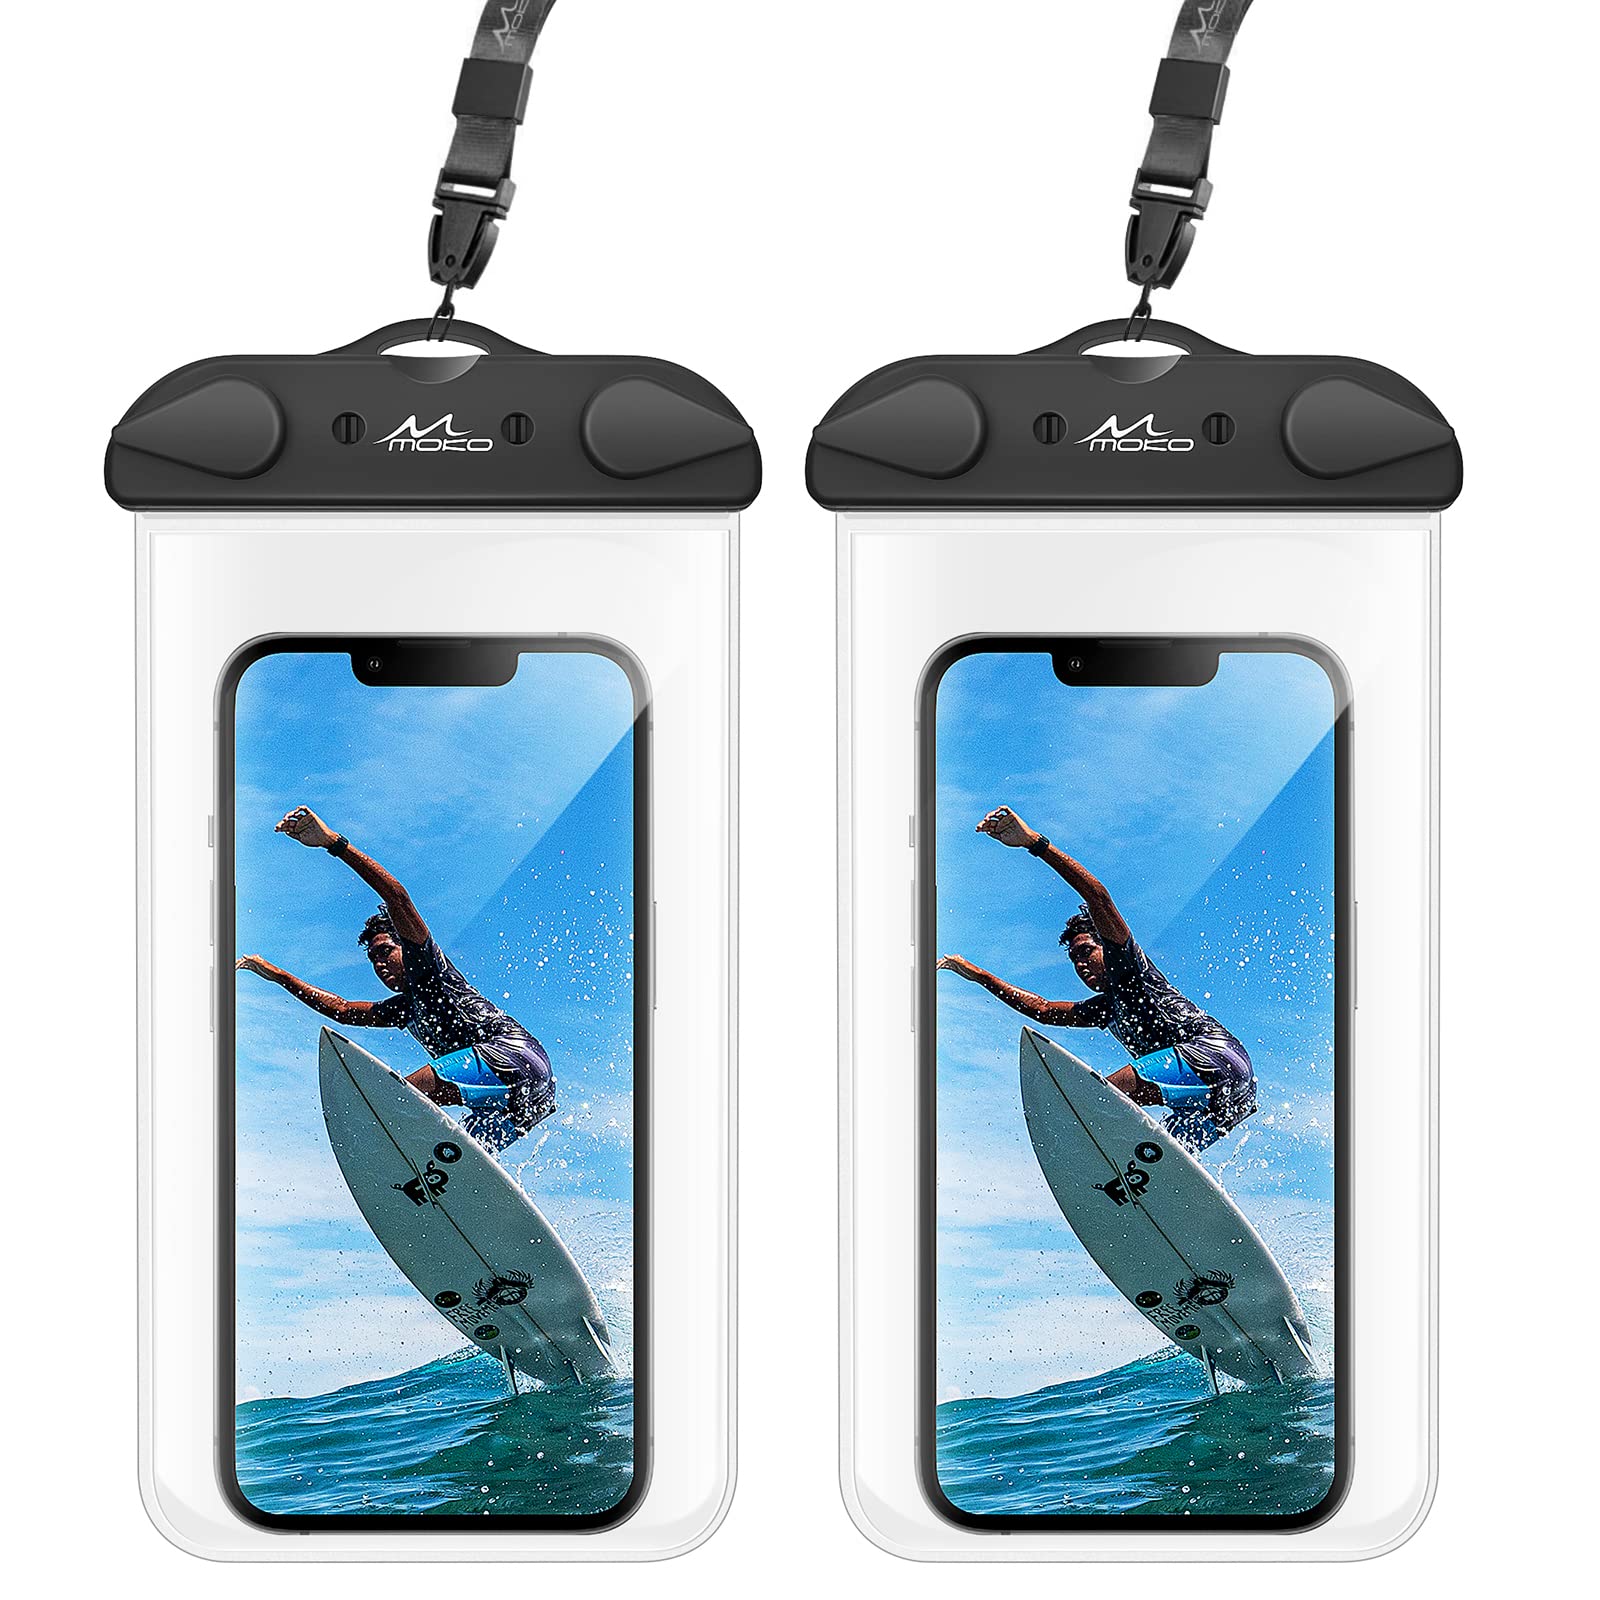 MoKo Waterproof Phone Pouch 2-Pack Compatible with iPhone 13/12/11 Pro Max/Mini, Xs Max Xr, SE 3/2, Galaxy S22/S21/20, Note 20/10, Cellphone Dry Bag Case for Snorkeling Swimming, Black + Black